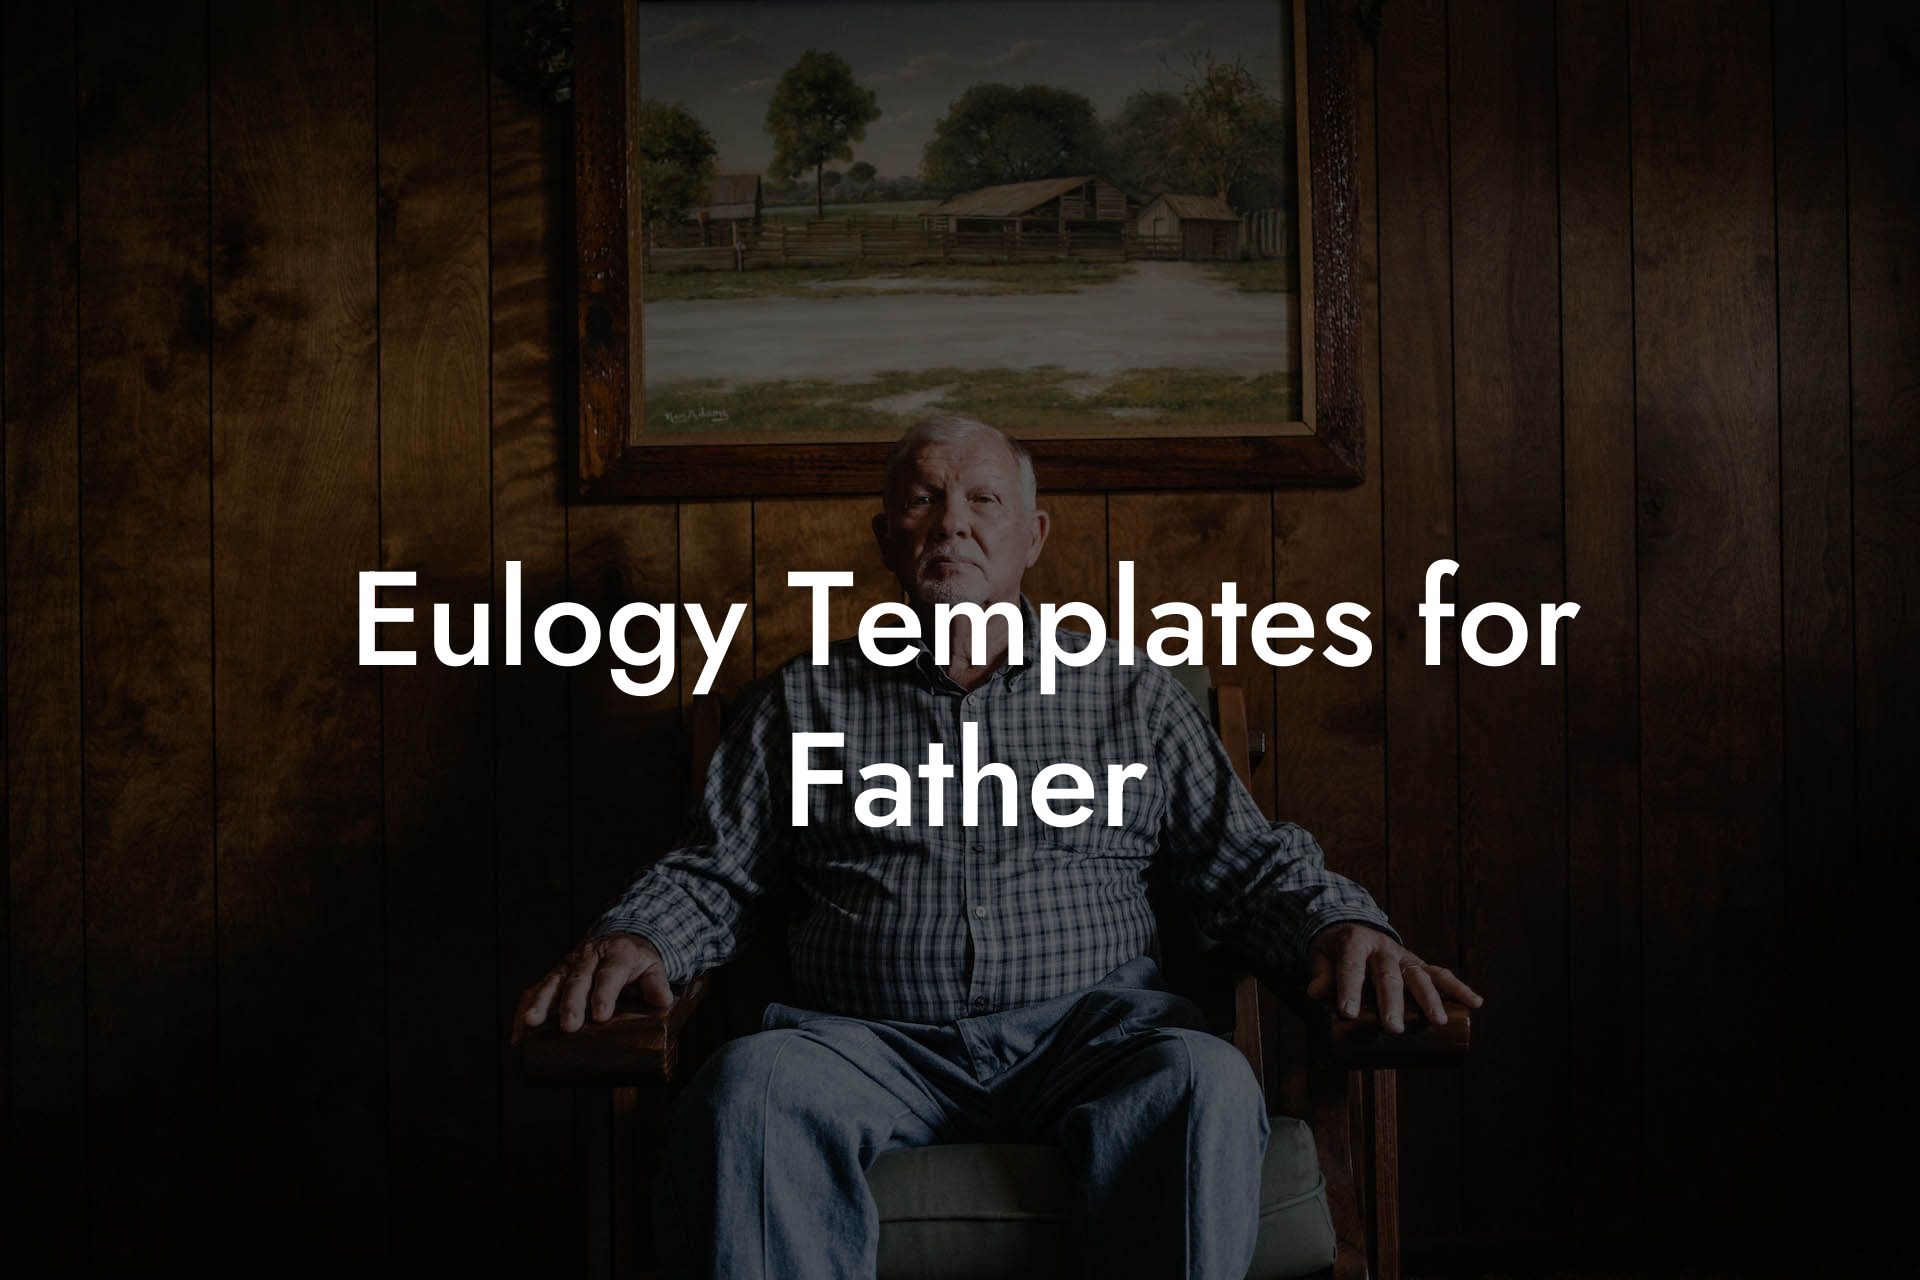 Eulogy Templates for Father